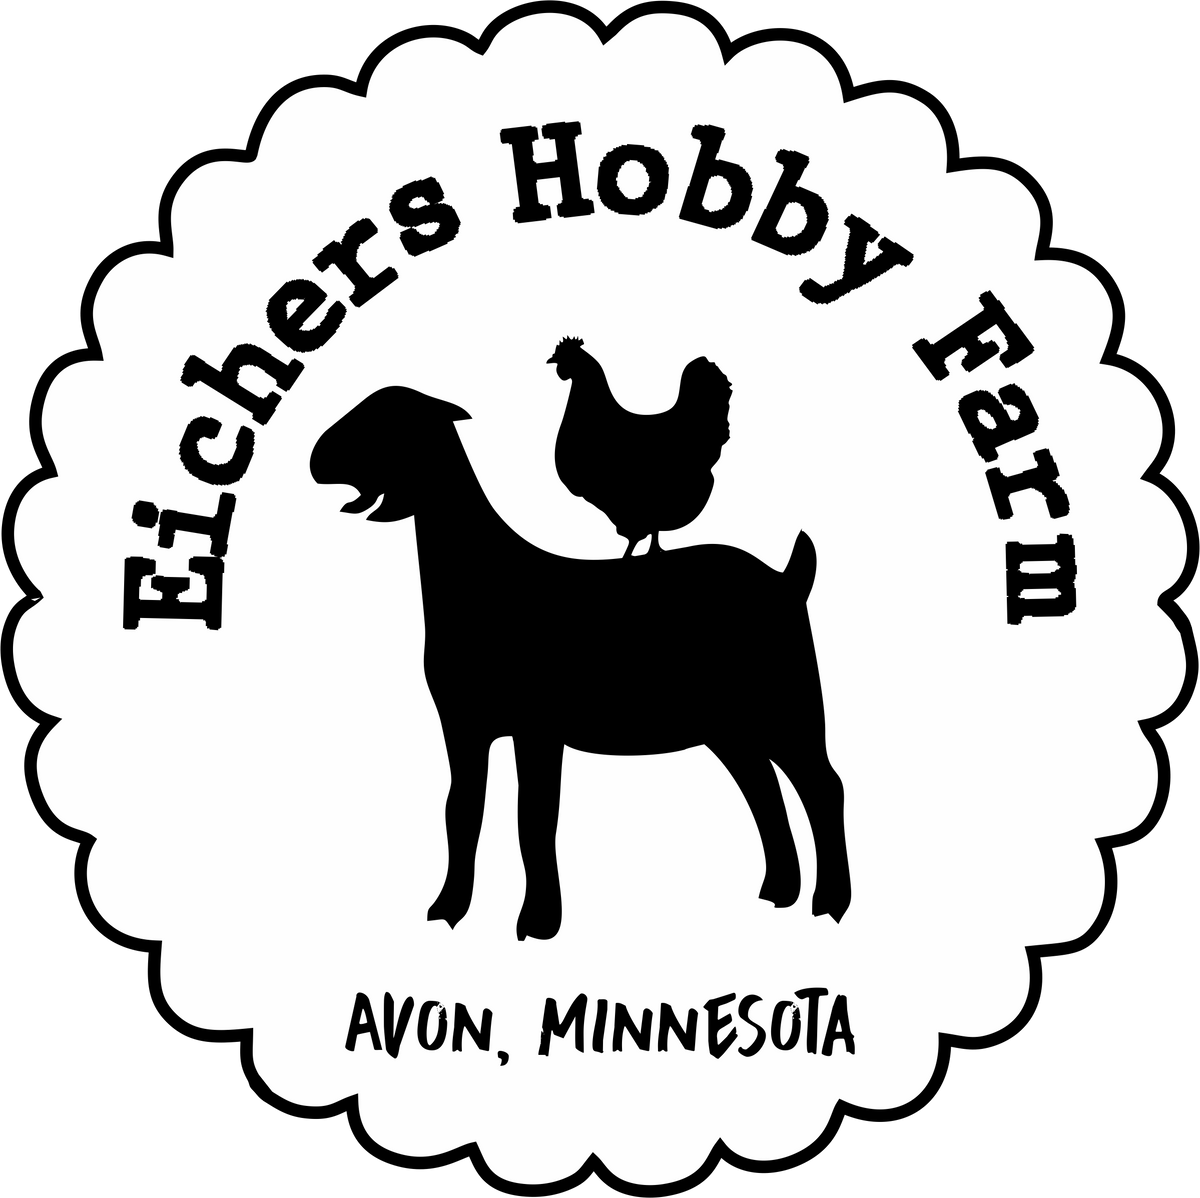 Eichers Hobby Farm: Buy Goat Milk Soap and Face and Body ...